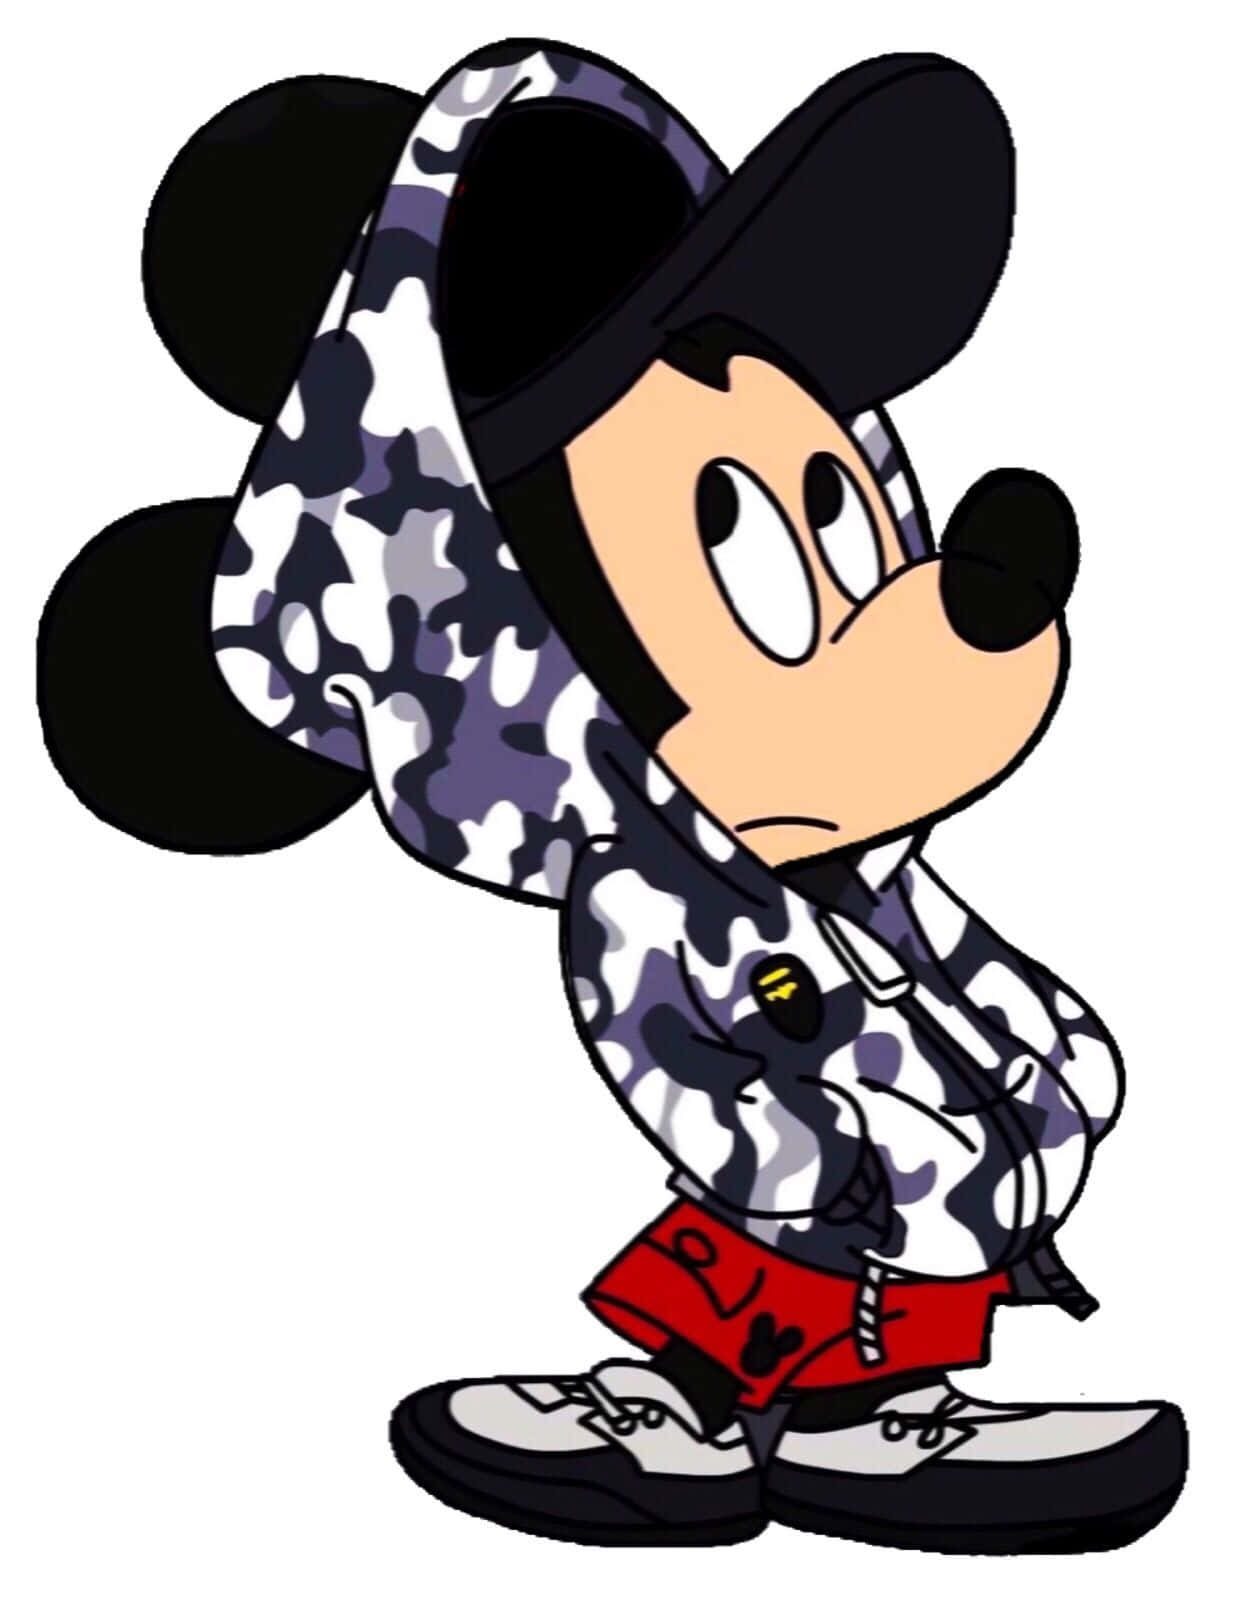 Mickey Mouse is cool in this wallpaper Wallpaper